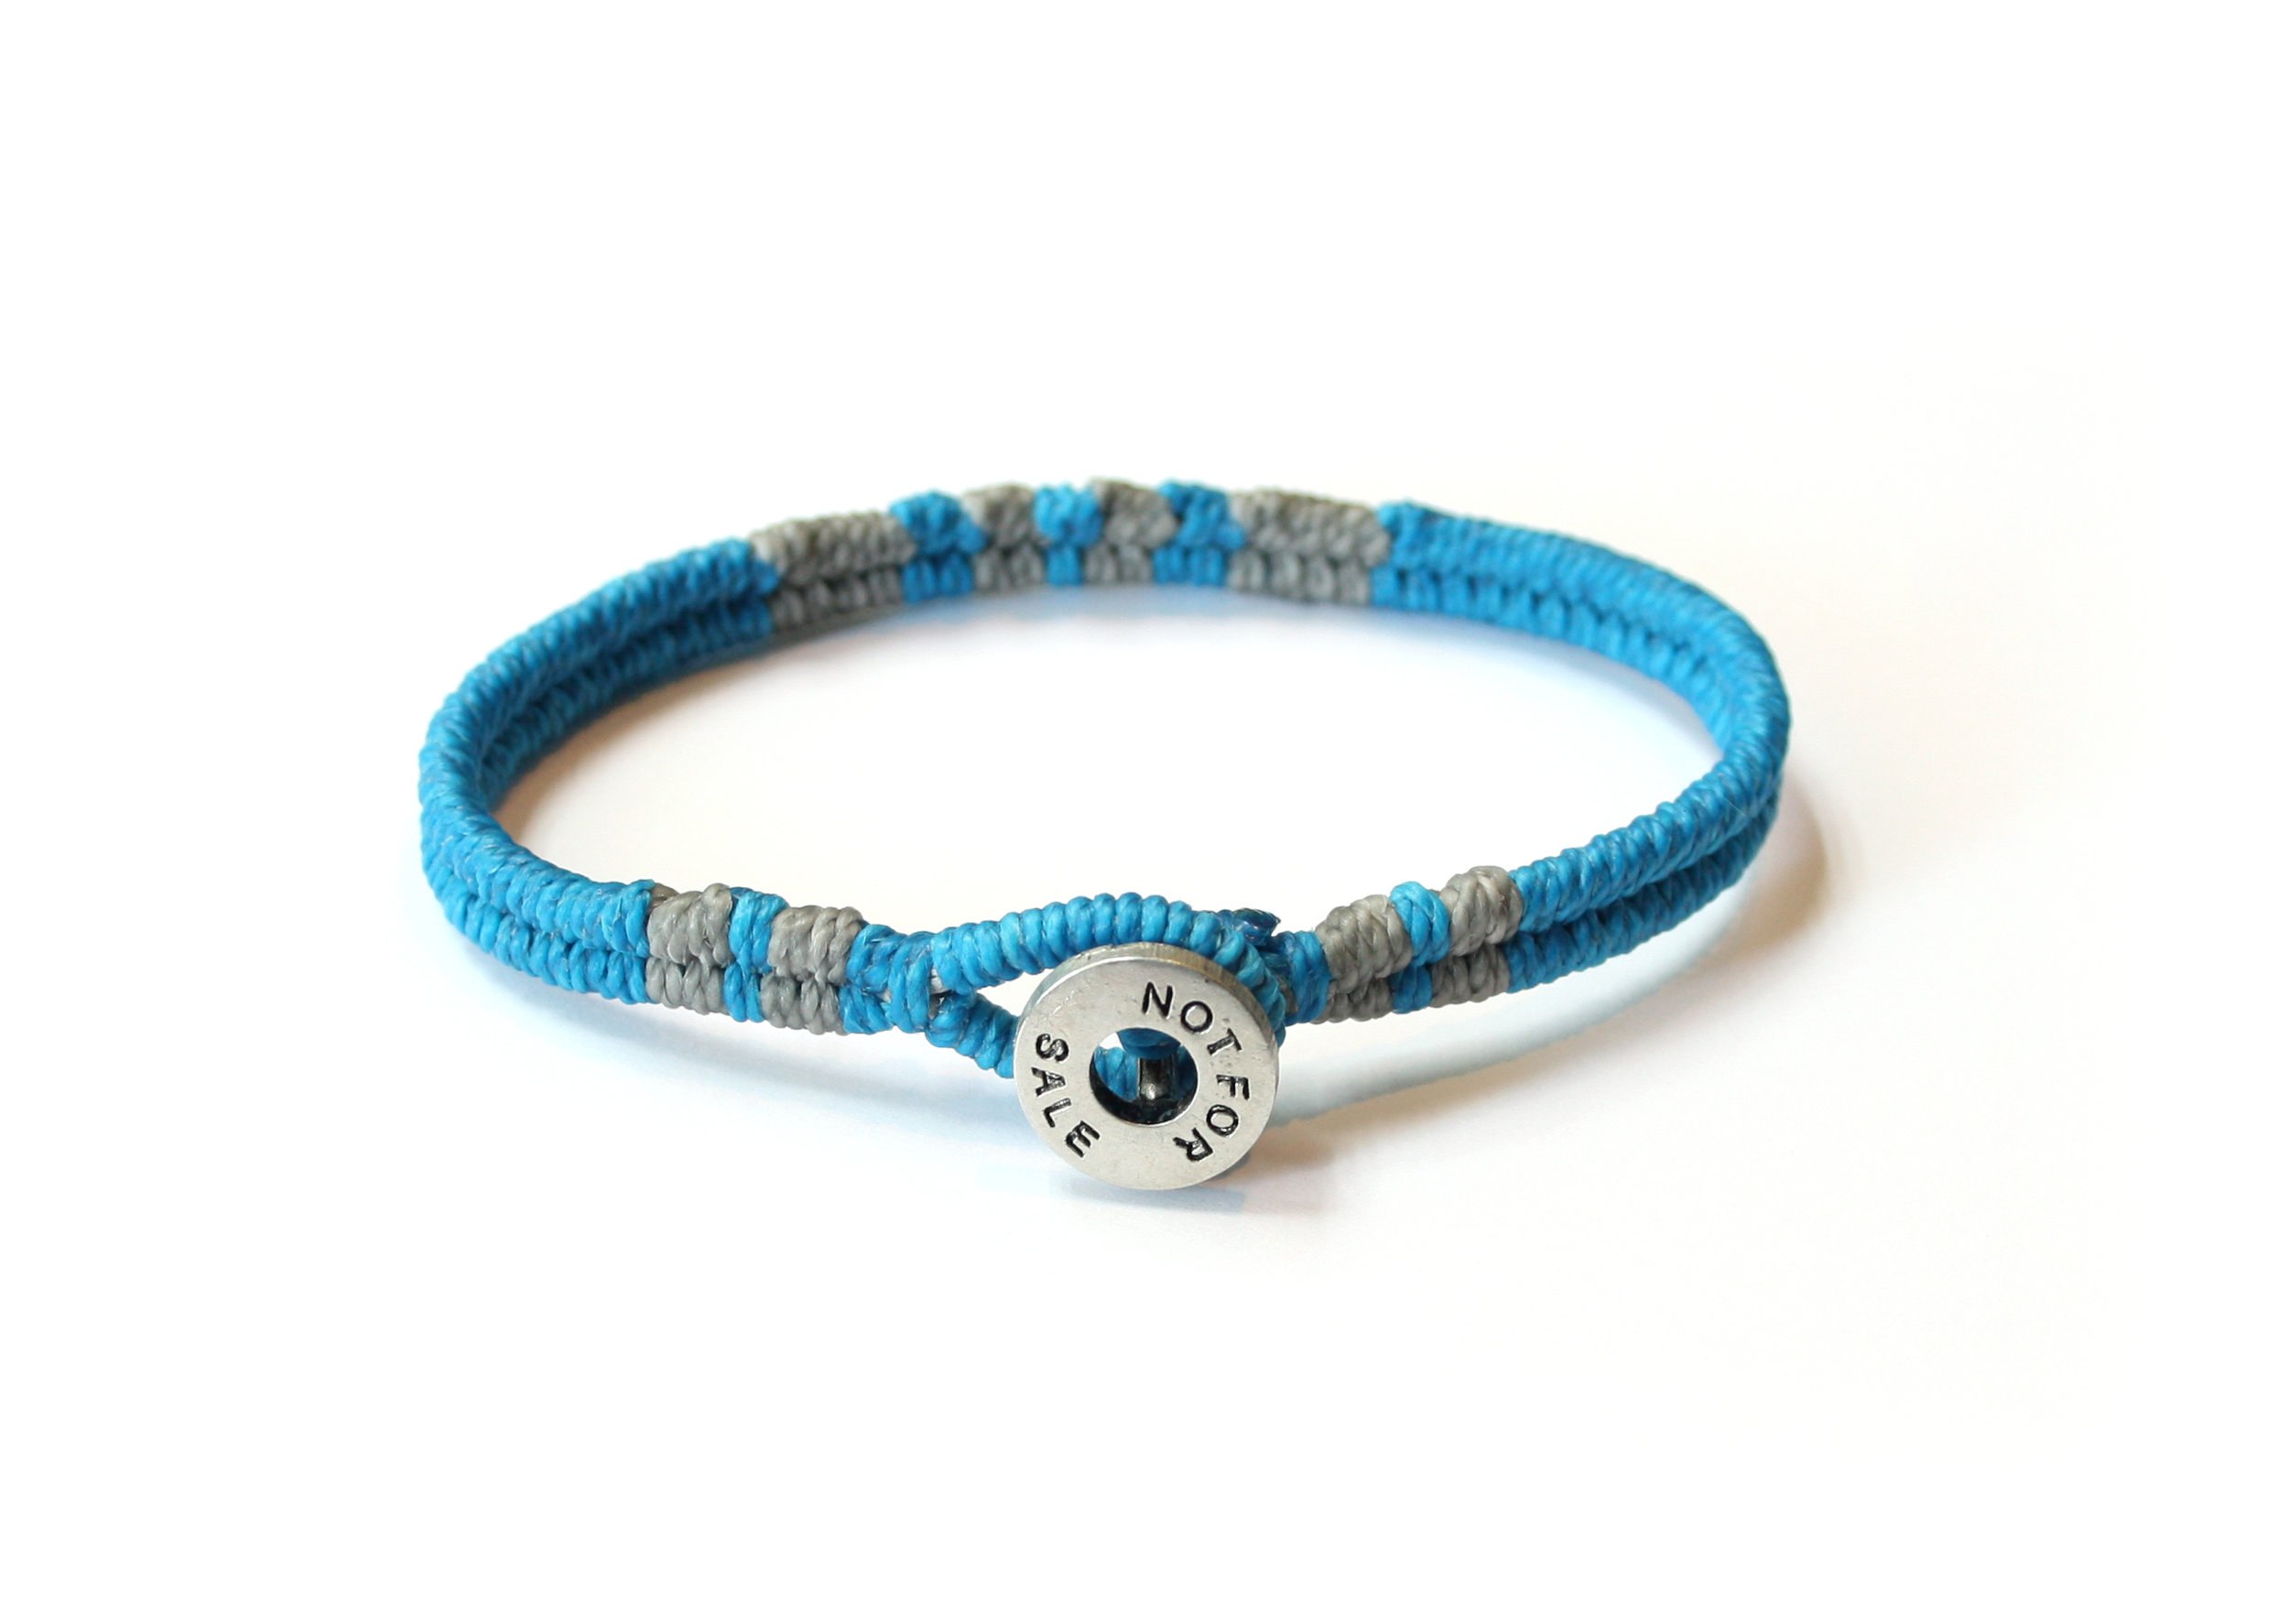 Charity Bracelets That Support Great Causes - Bead the Change